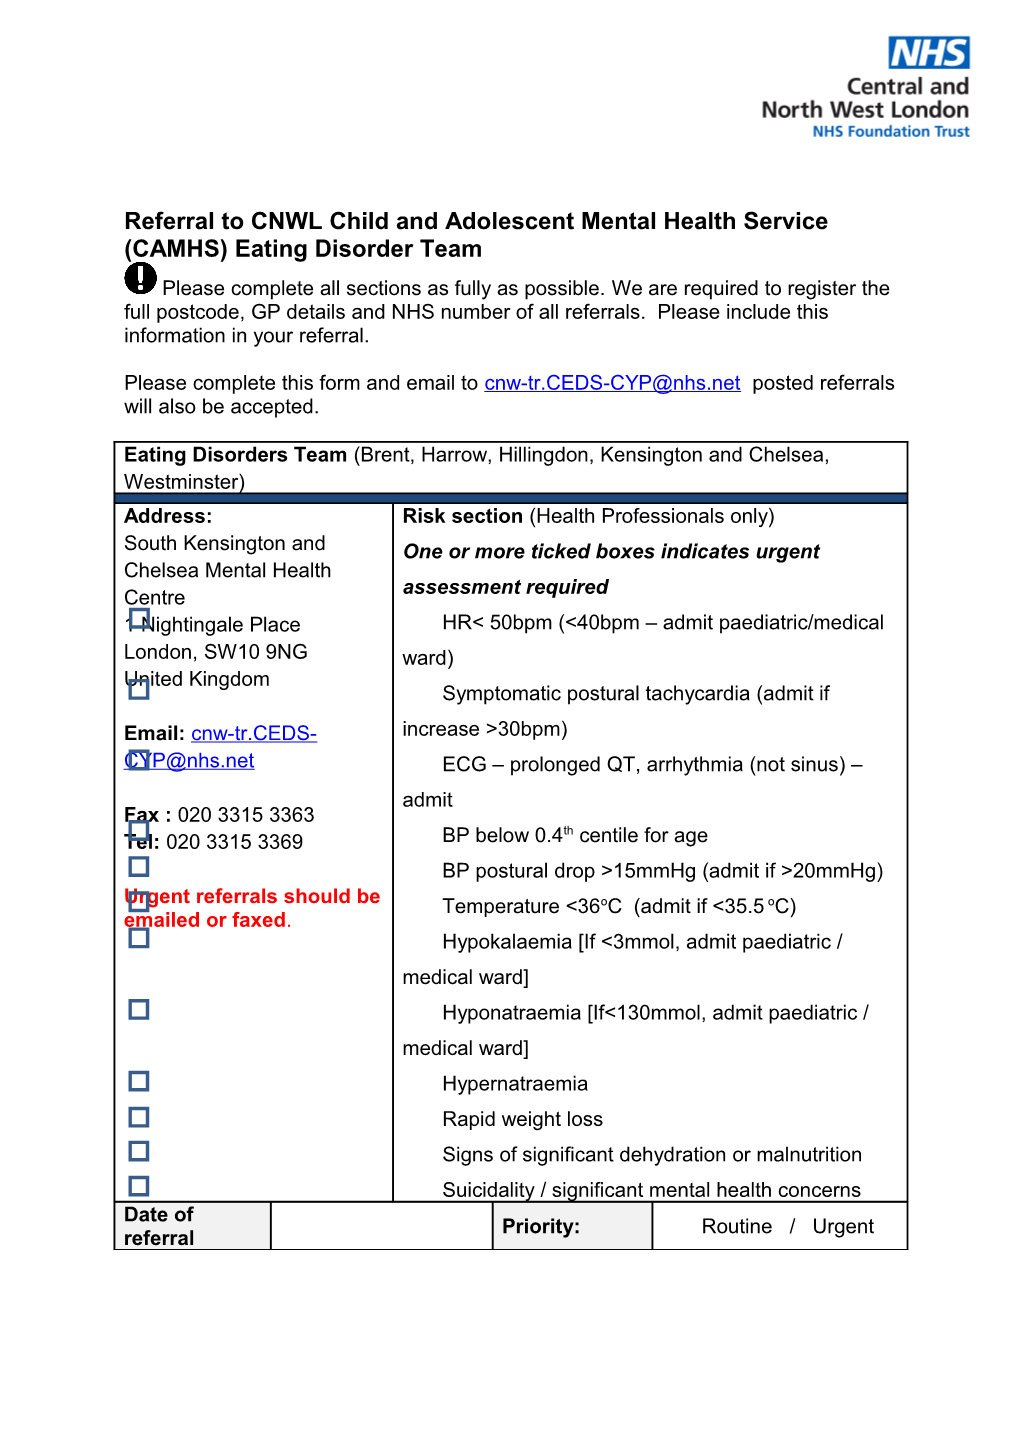 Referral to CNWL Child and Adolescent Mental Health Service (CAMHS) Eating Disorder Team